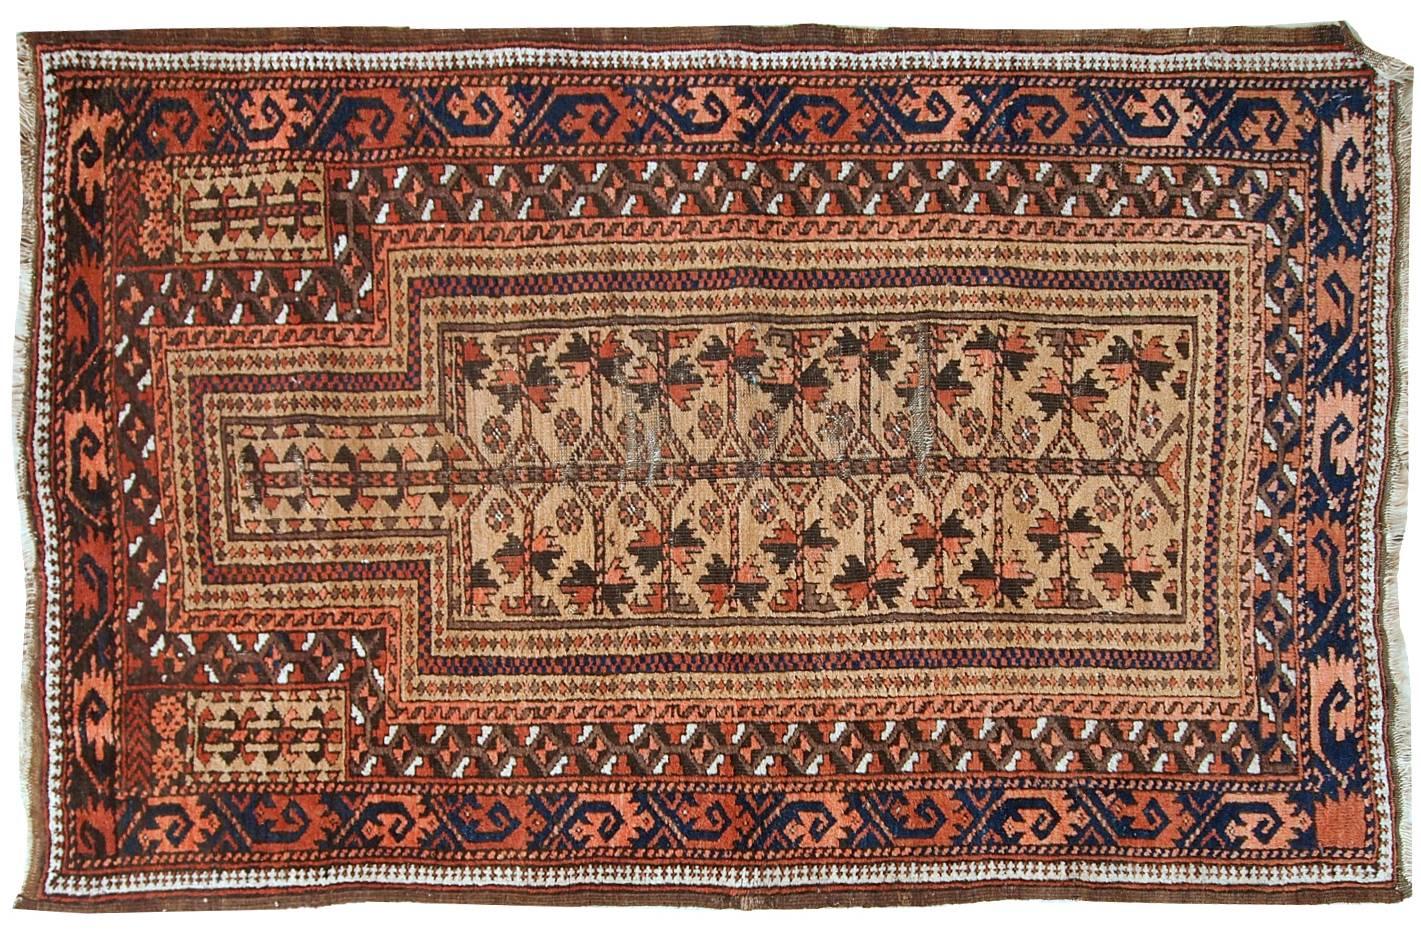 This prayer Baluch rug is in original condition, it has some little age wear and old restoration from the back. Light shade of brown on the field and red decorations. The border has beautiful tribal design in navy blue, pink and red.
 